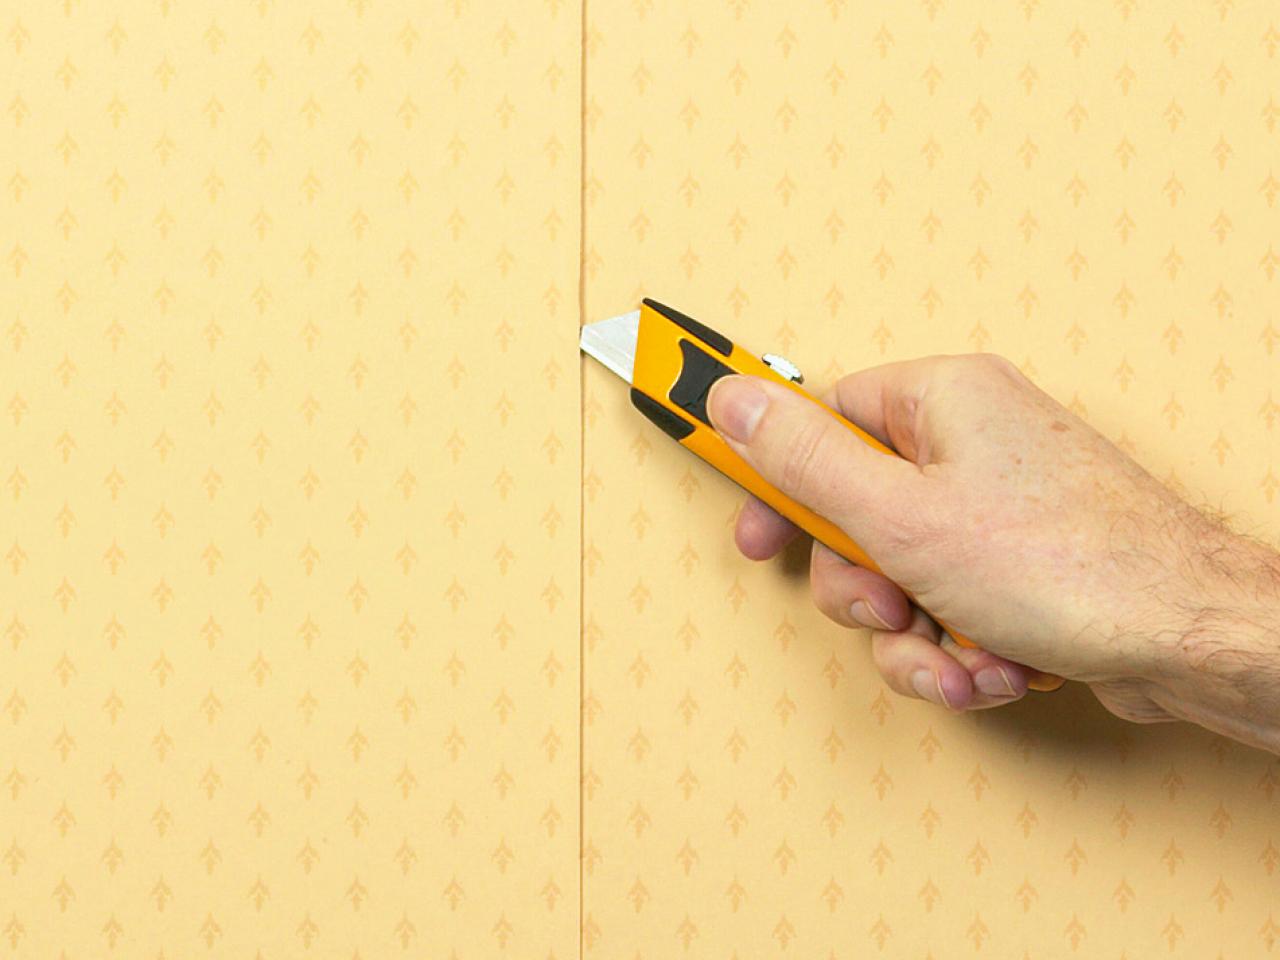 https://sense-life.com/wp-content/uploads/2019/04/how-to-get-creases-out-of-wallpaper-1420852808872.jpg